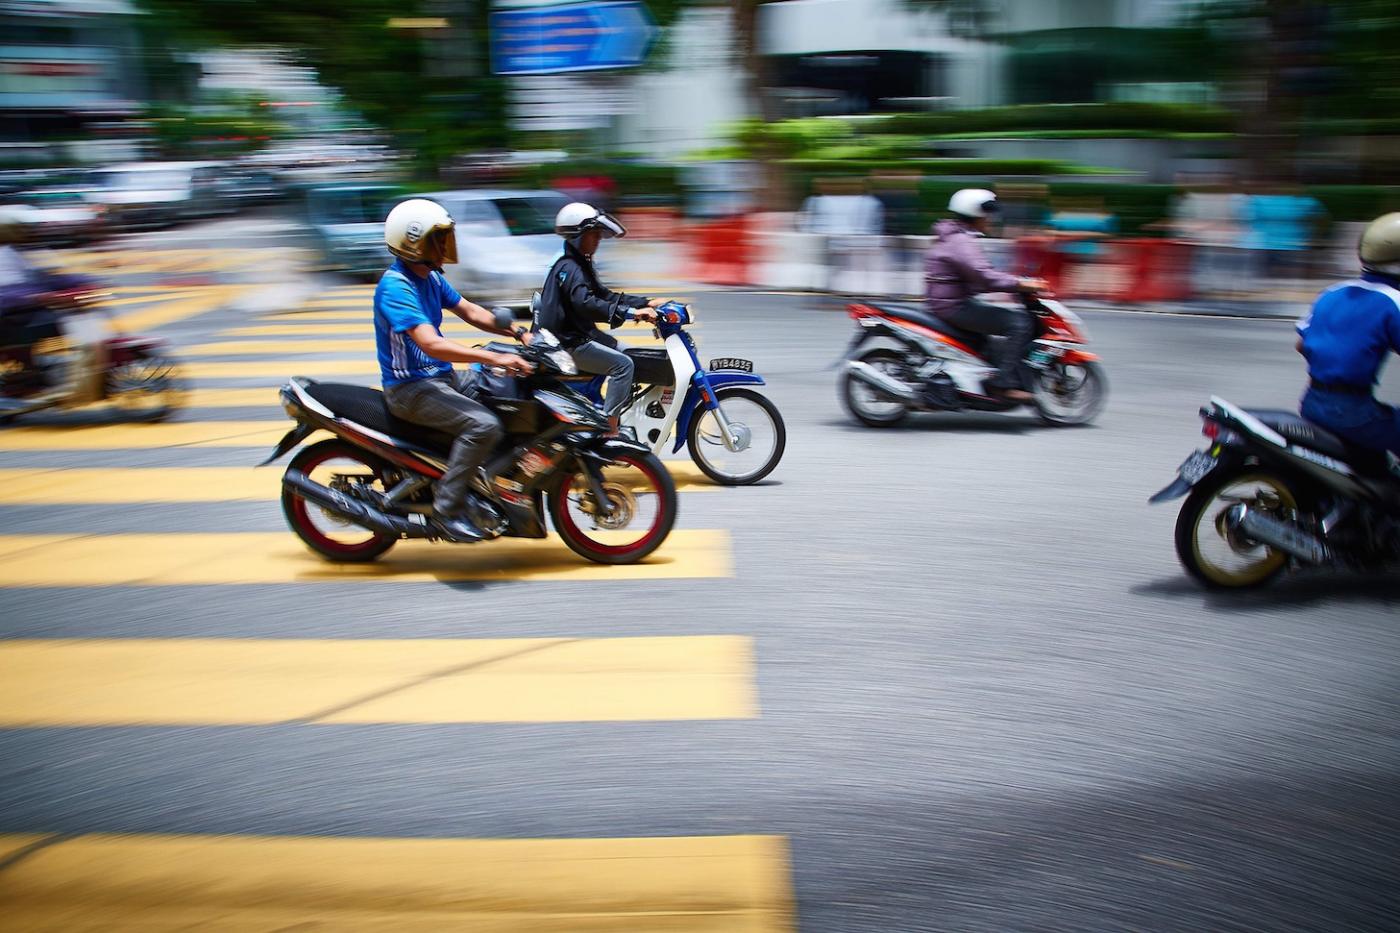 Southeast Asia &amp; the Art of Motorbike Safety